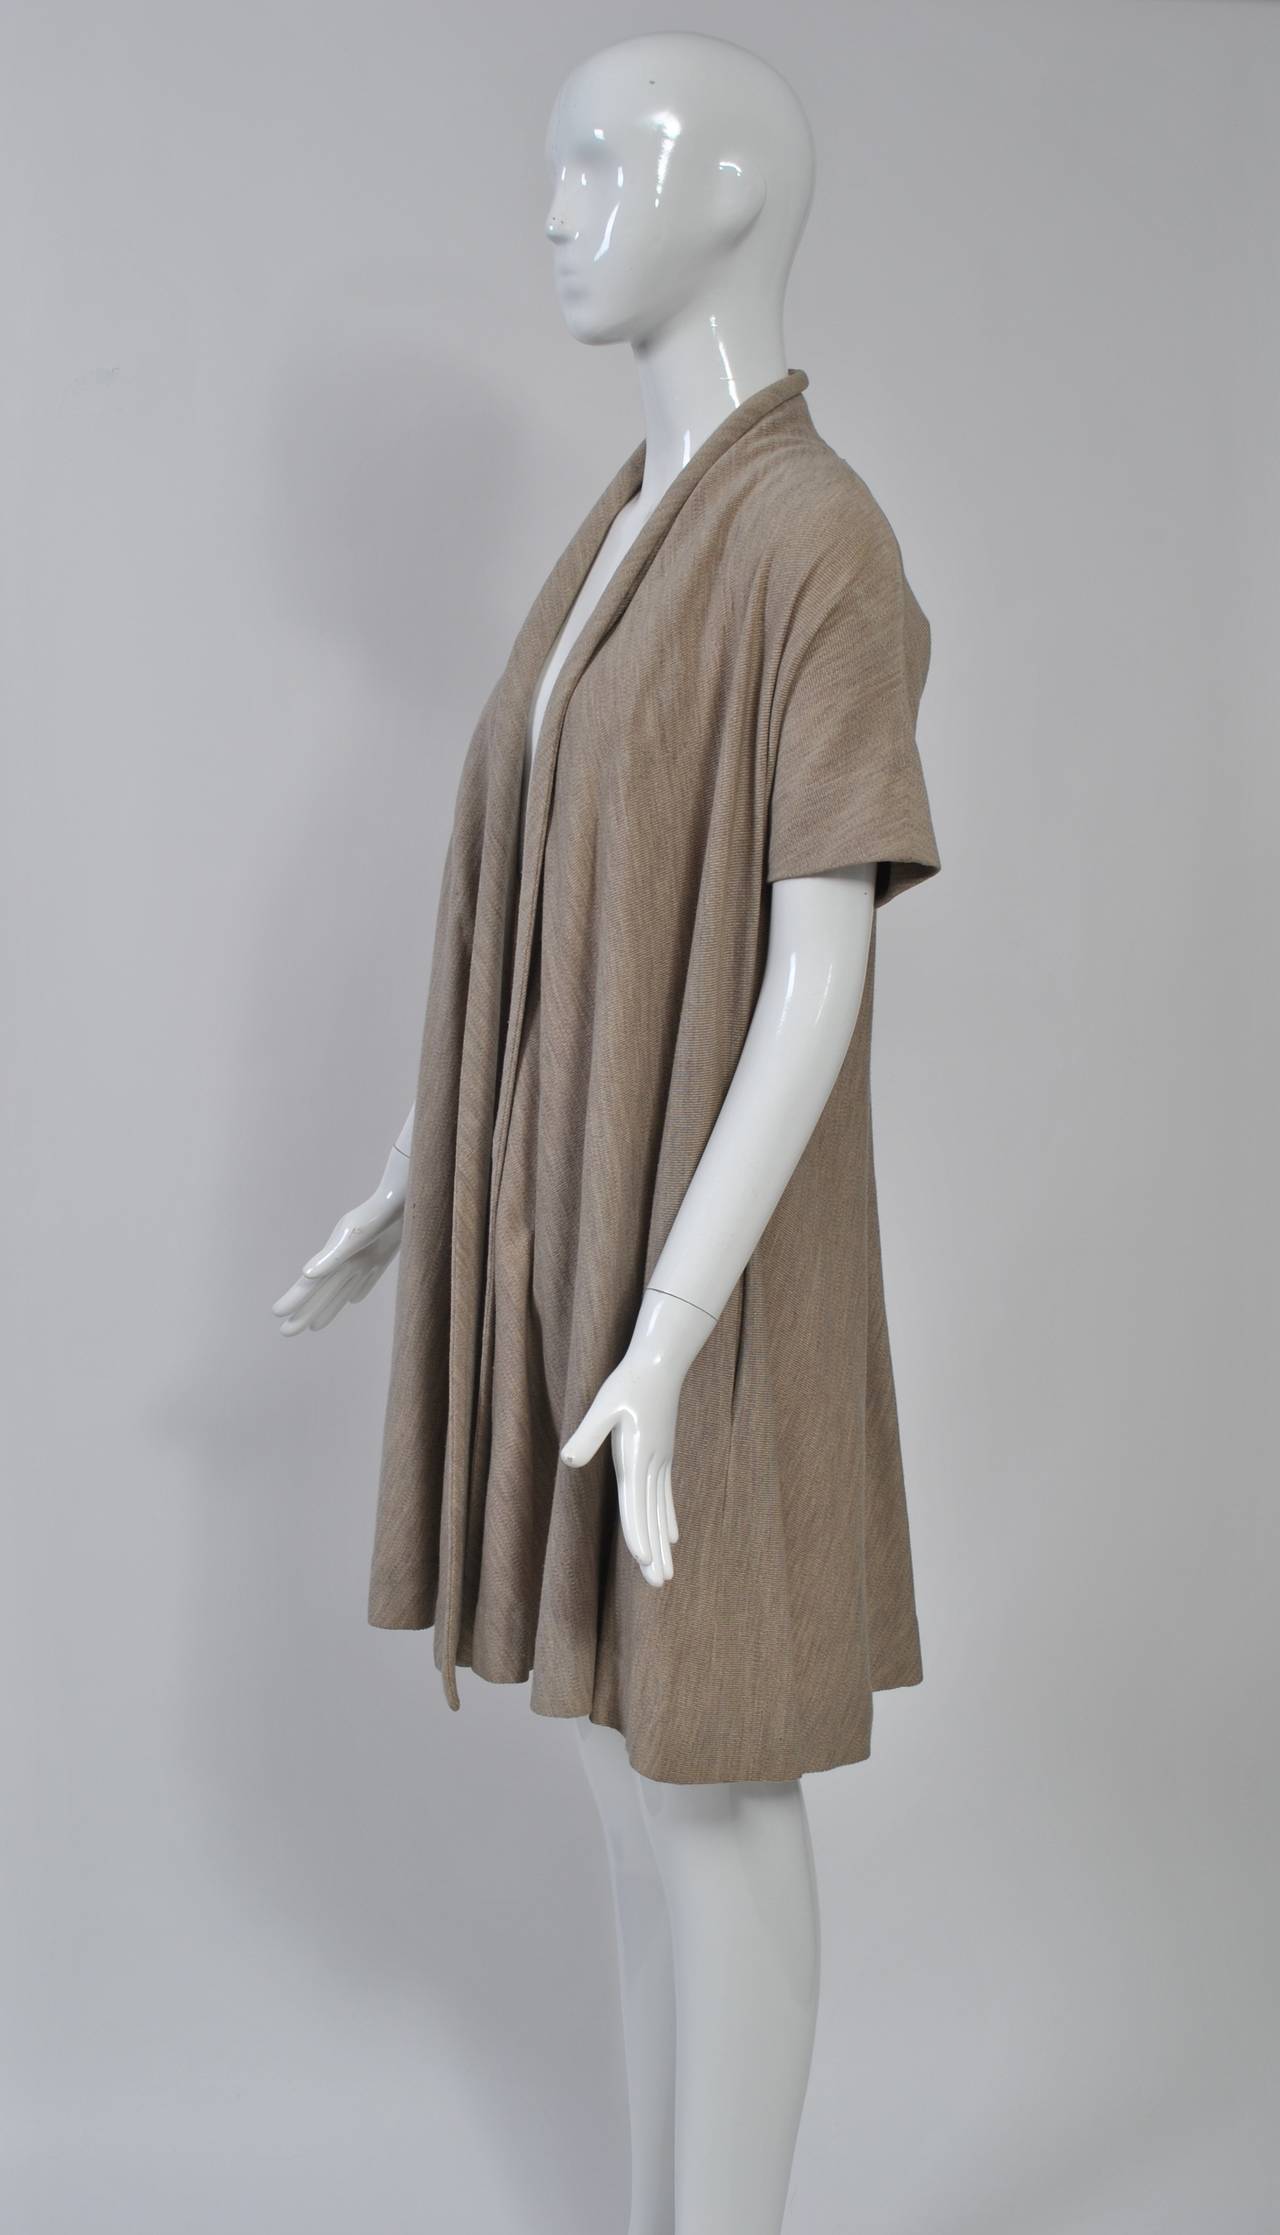 Claire McCardell short-sleeve swing coat in oatmeal wool knit features raglan sleeves, side pockets and rolled collar edge. Unlined. Very wearable with a contemporary wardrobe. Size S.